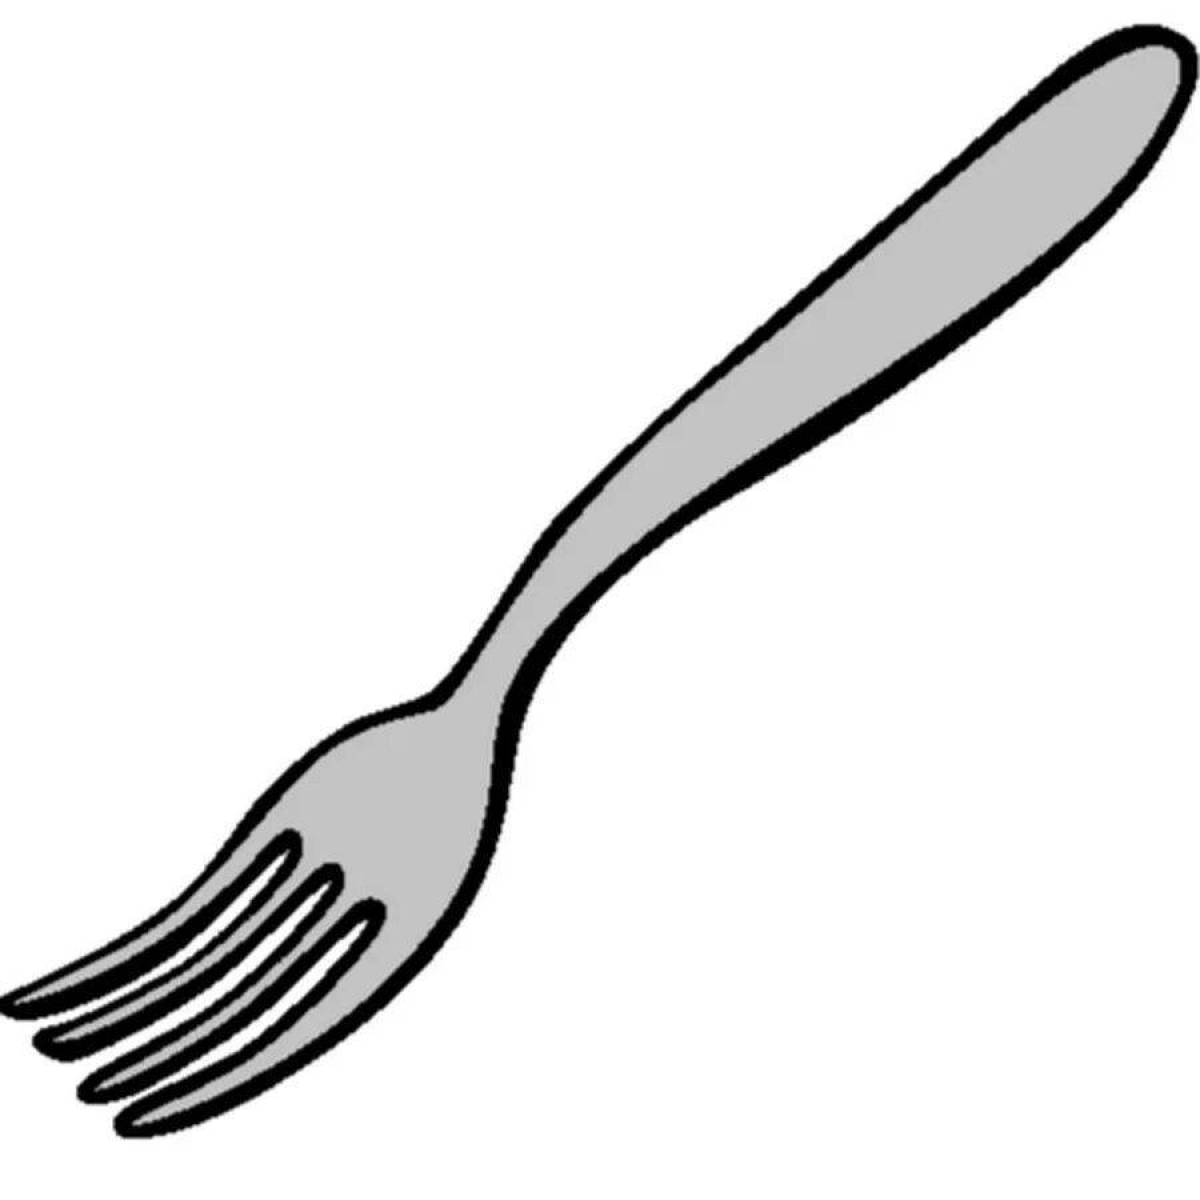 Lovely fork coloring page